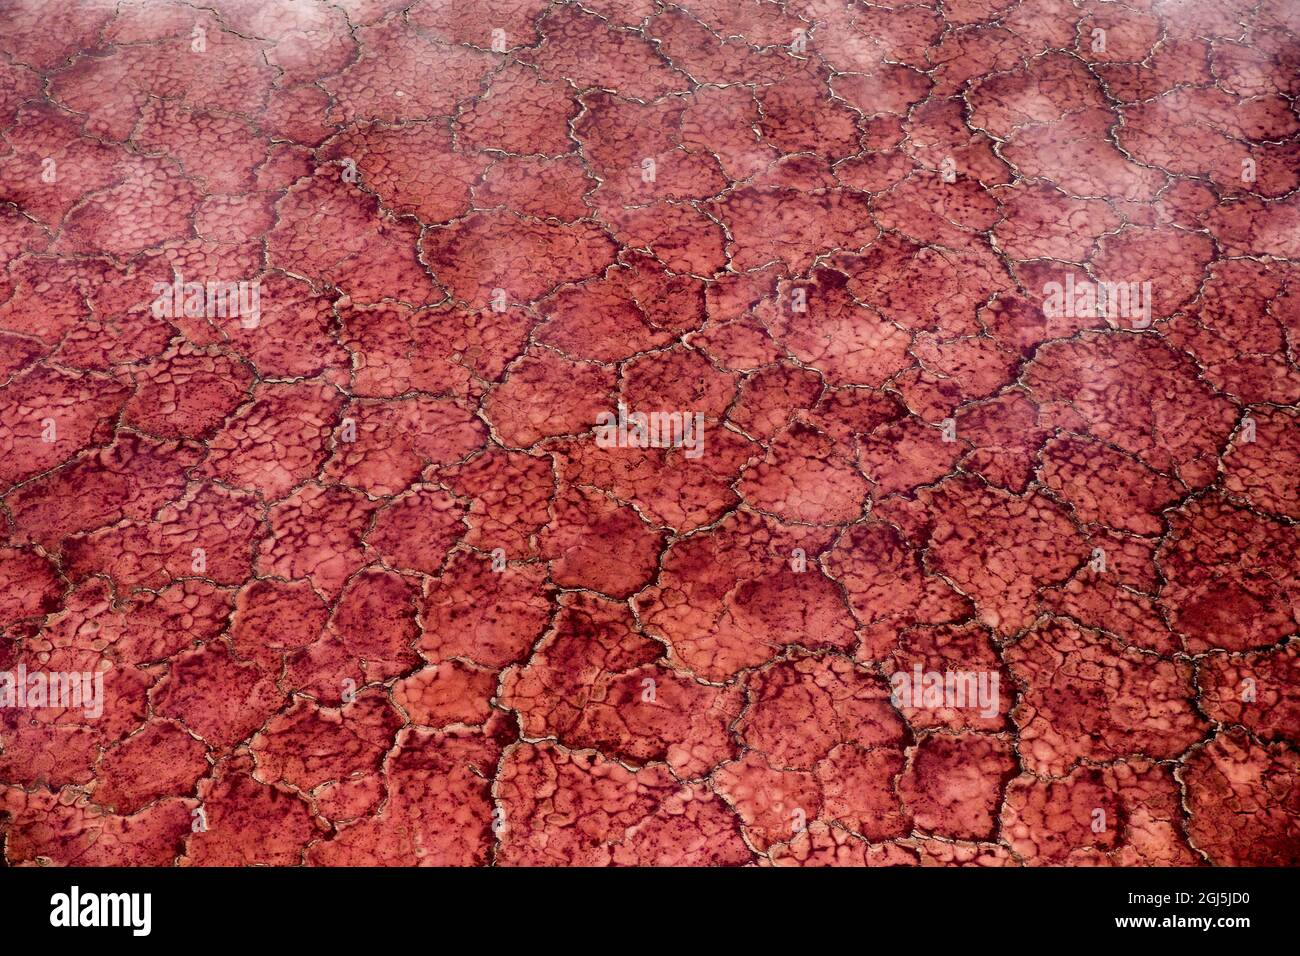 Africa, Tanzania, Aerial view of patterns of red algae and salt formations in shallow salt waters of Lake Natron Stock Photo